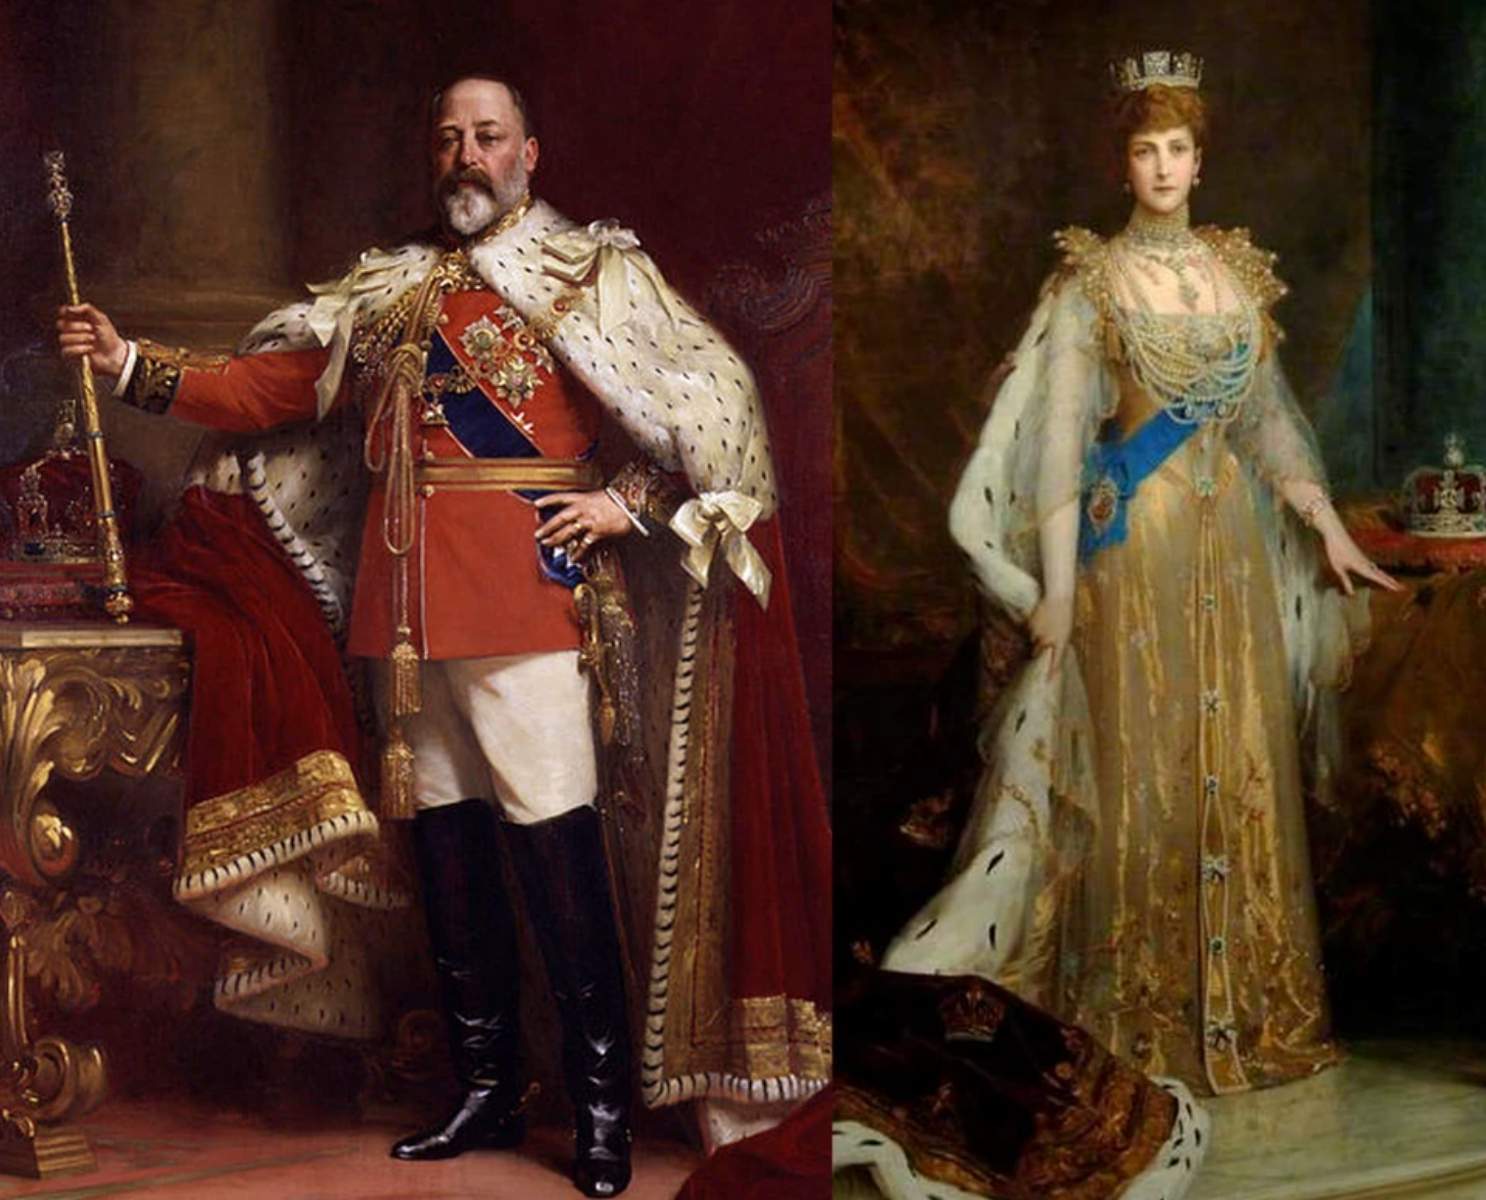 Coronation of Edward VII and Queen Alexandra, 1902